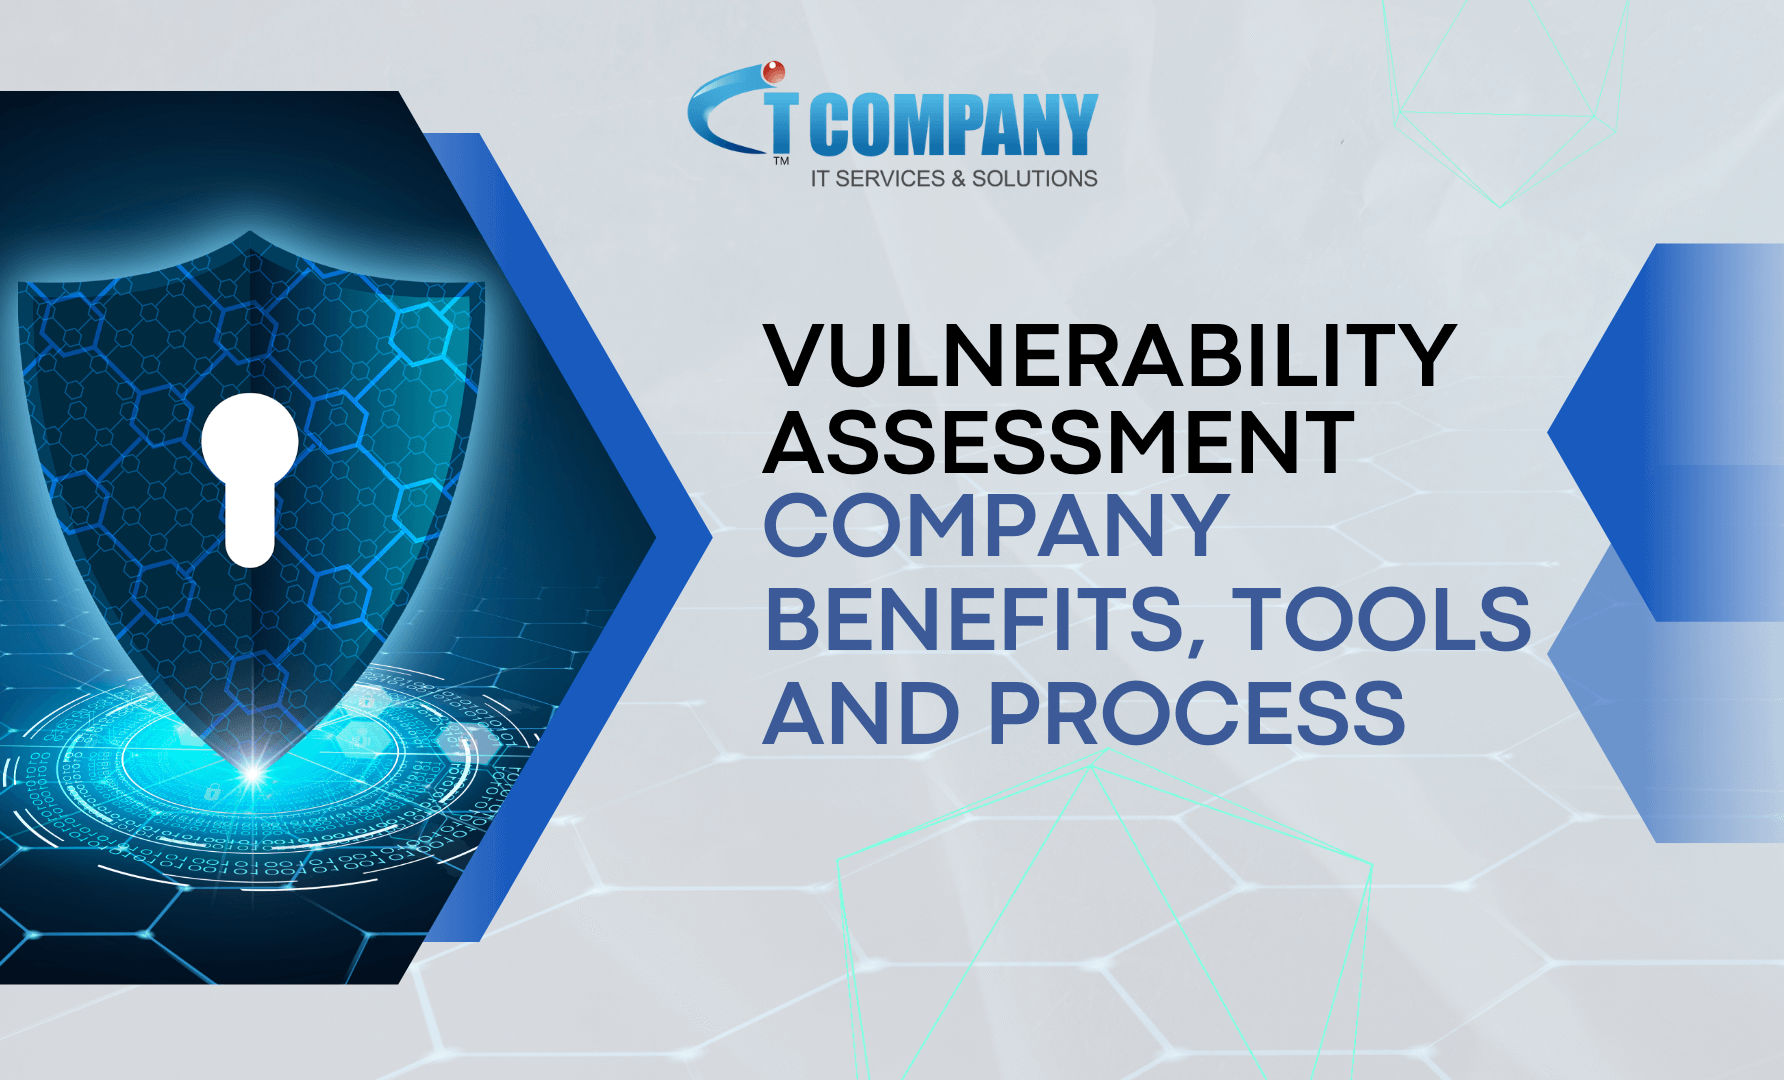 Vulnerability Assessment Company Benefits, Tools and Process